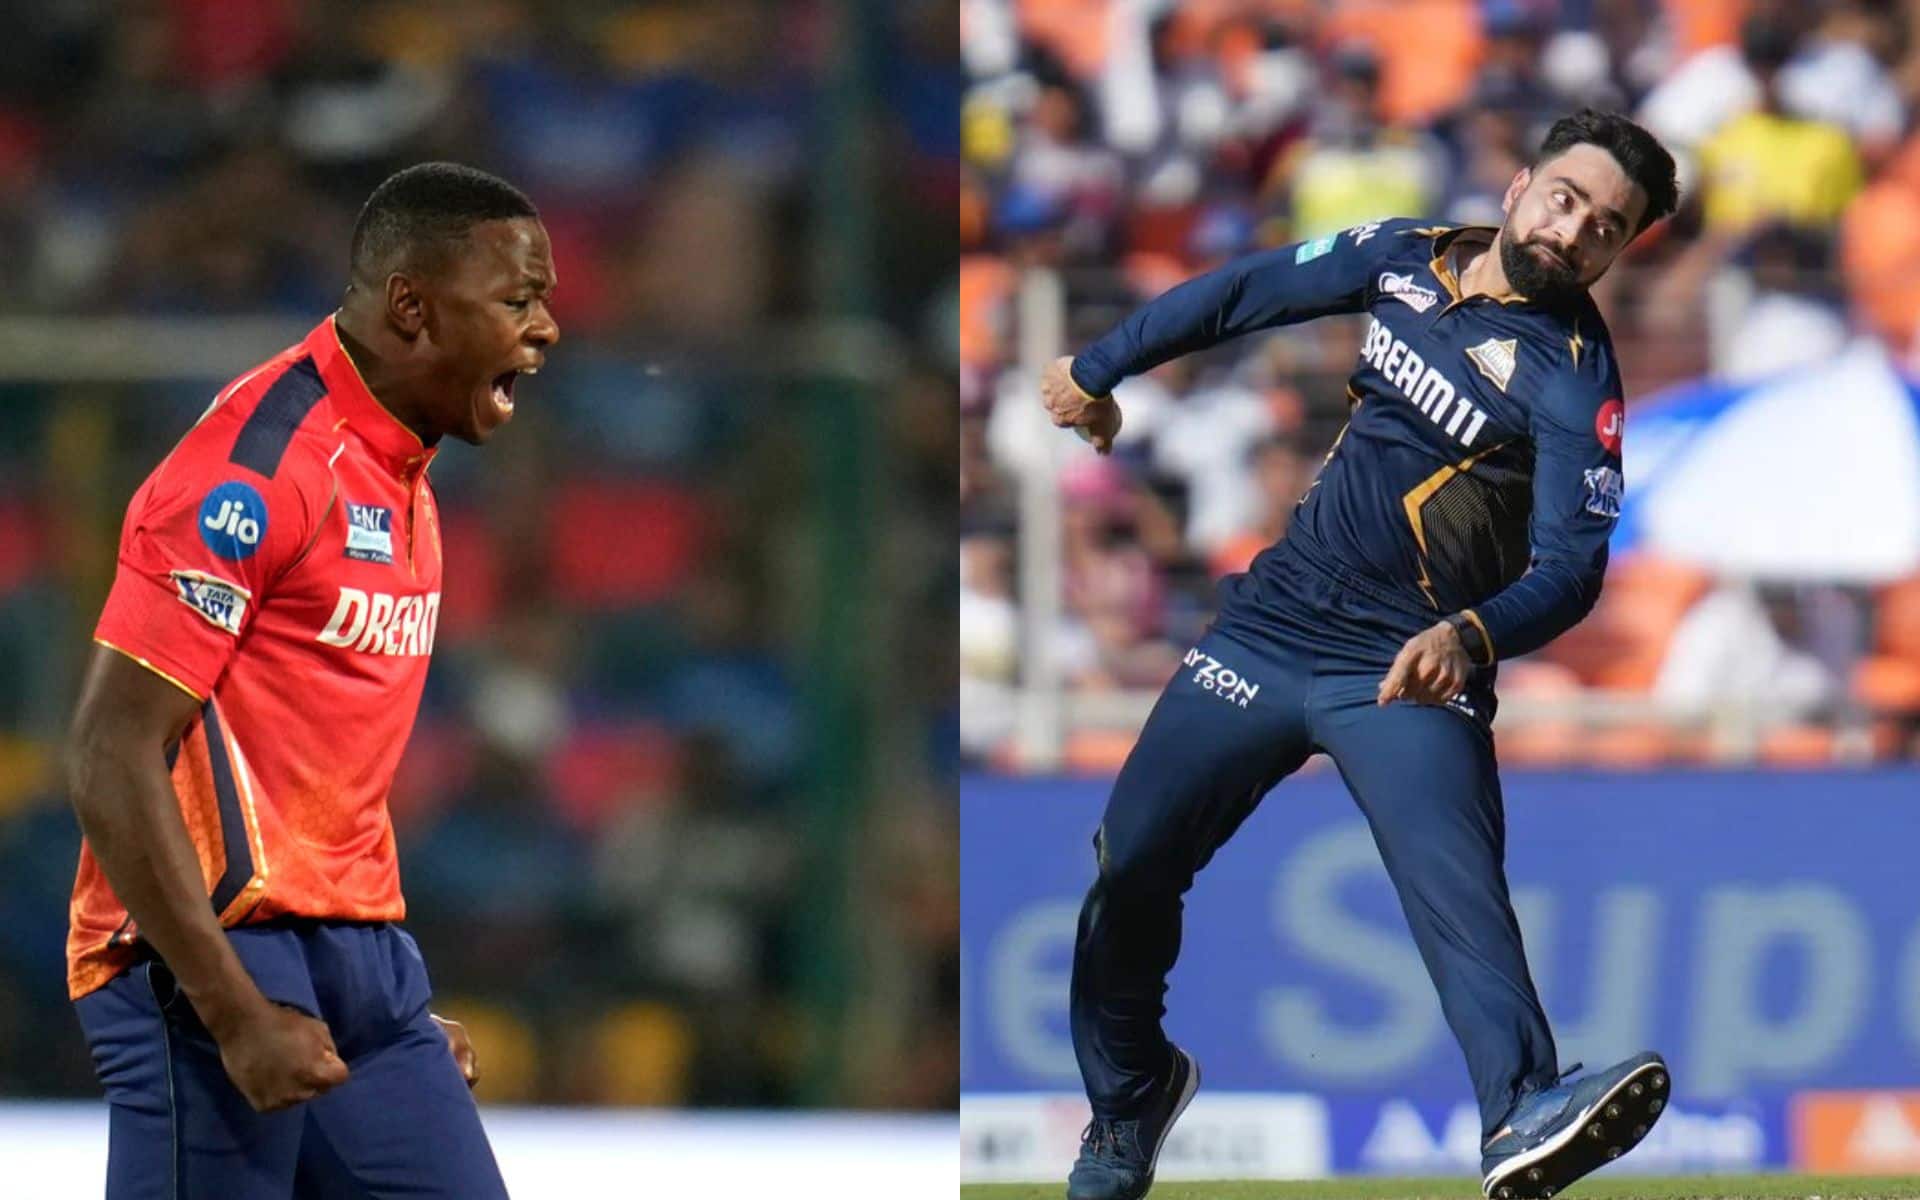 KG Rabada and Rashid Khan might play an important role in the 17th IPL match [iplt20.com]